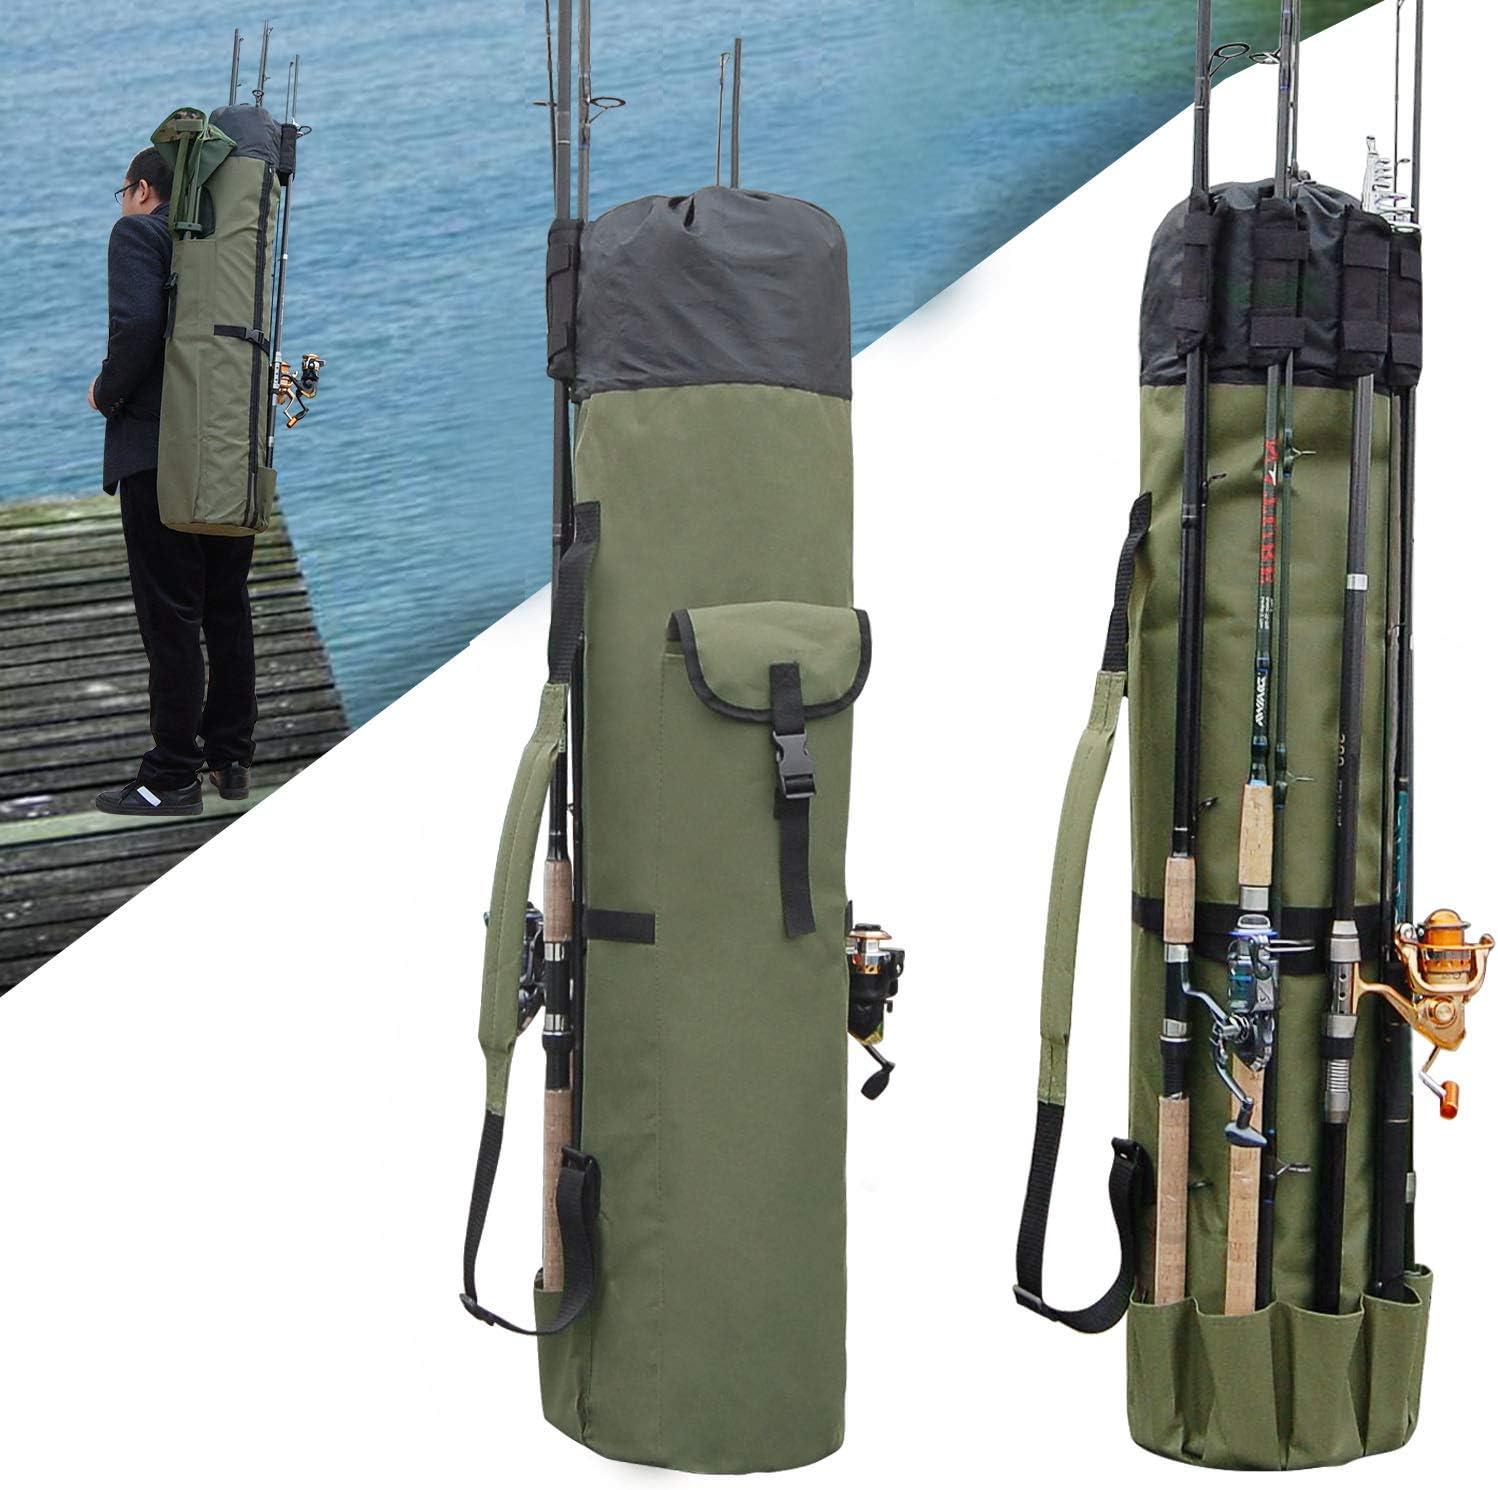 JSHANMEI Fishing Pole Bag with Rod Holder Waterproof Fishing Pole Case Rod  Bag Holds 5 Poles Fishing Tackle Storage Bag Tavel Case Large Capacity  Organizer Fishing Gear Bag Gifts for Men